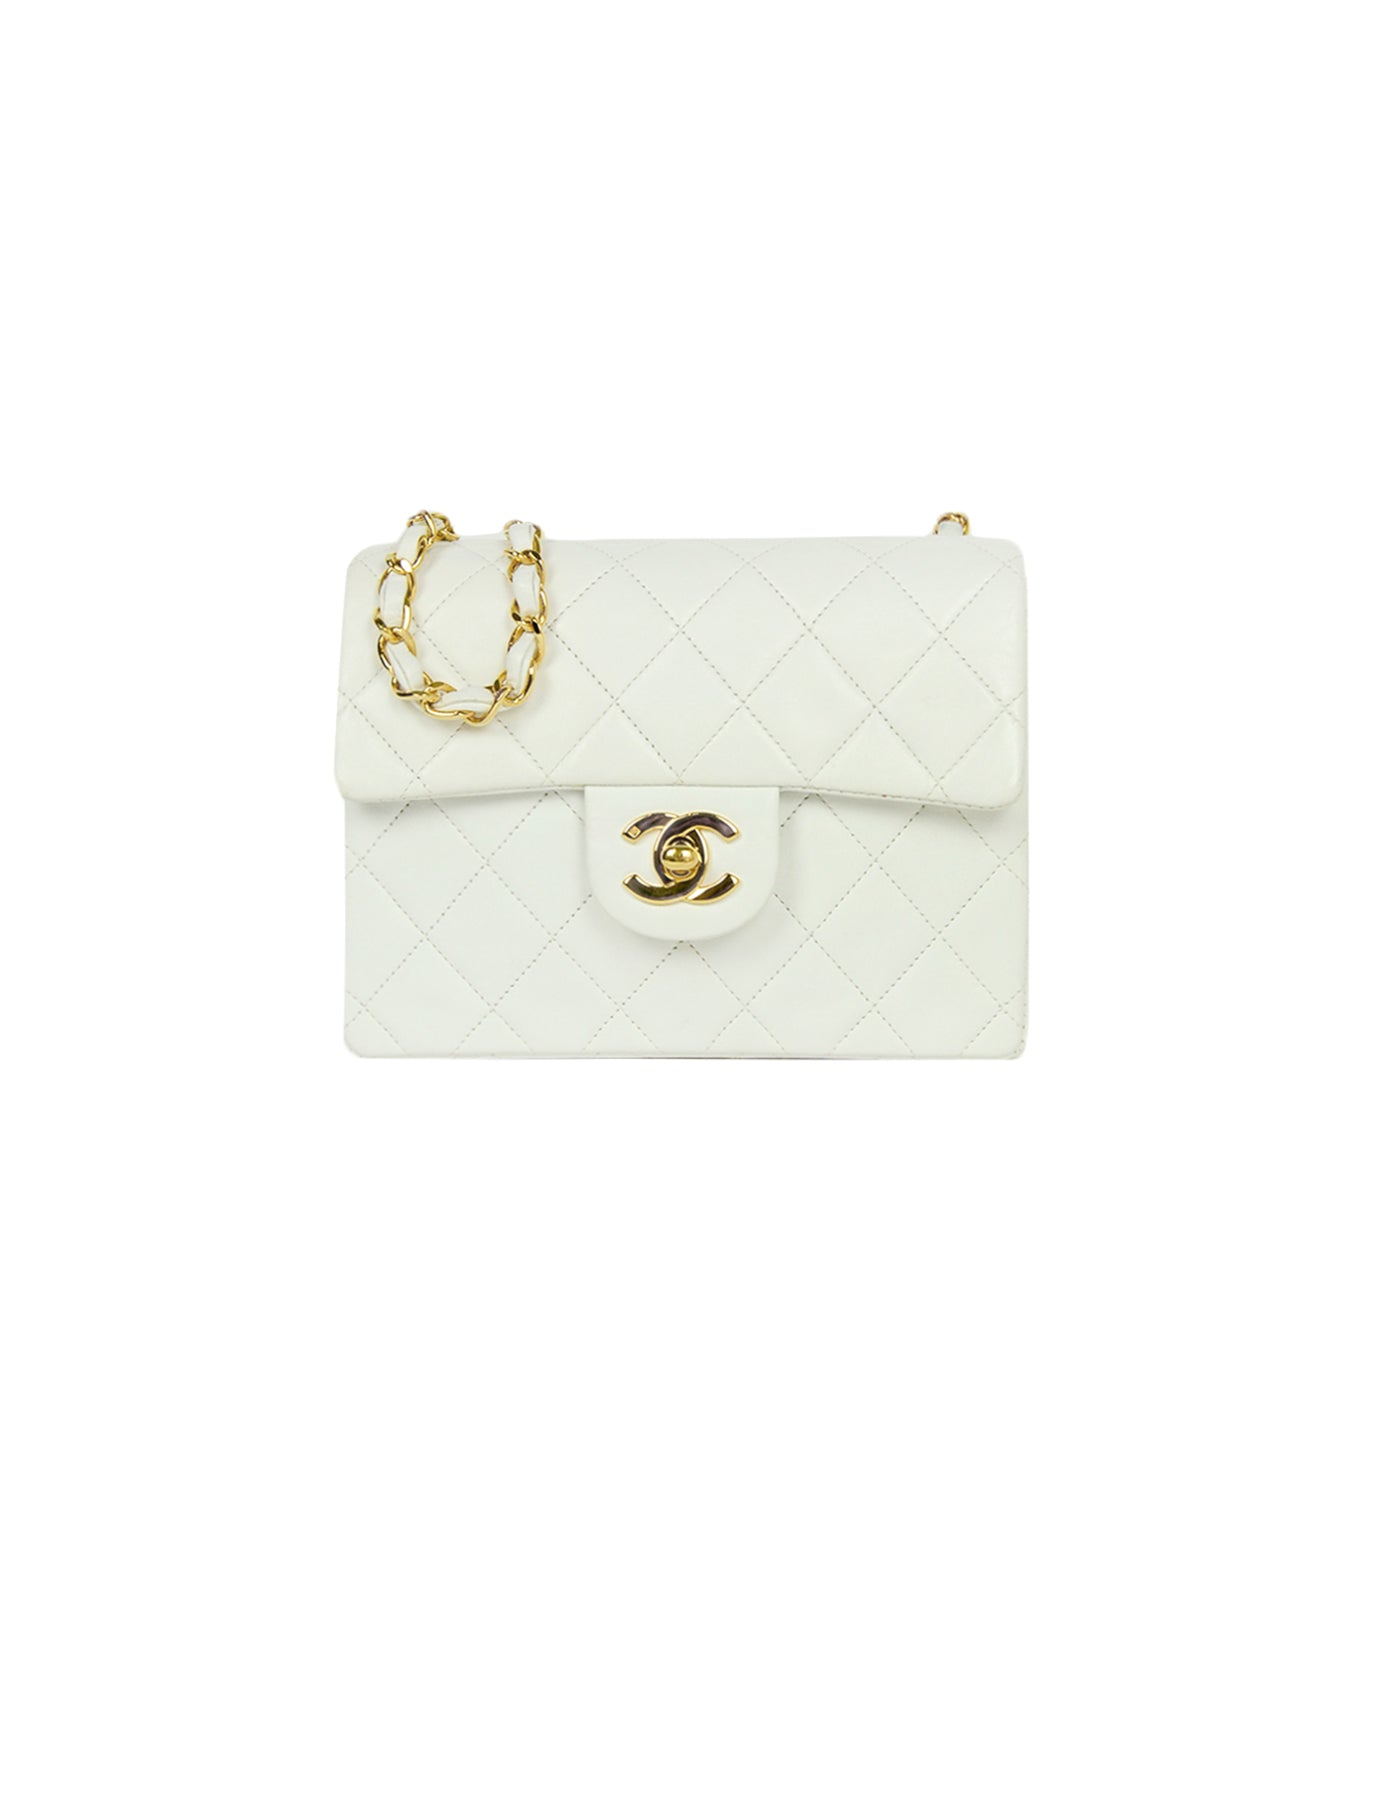 Chanel White Lambskin Leather Quilted Square Mini Flap Classic Bag